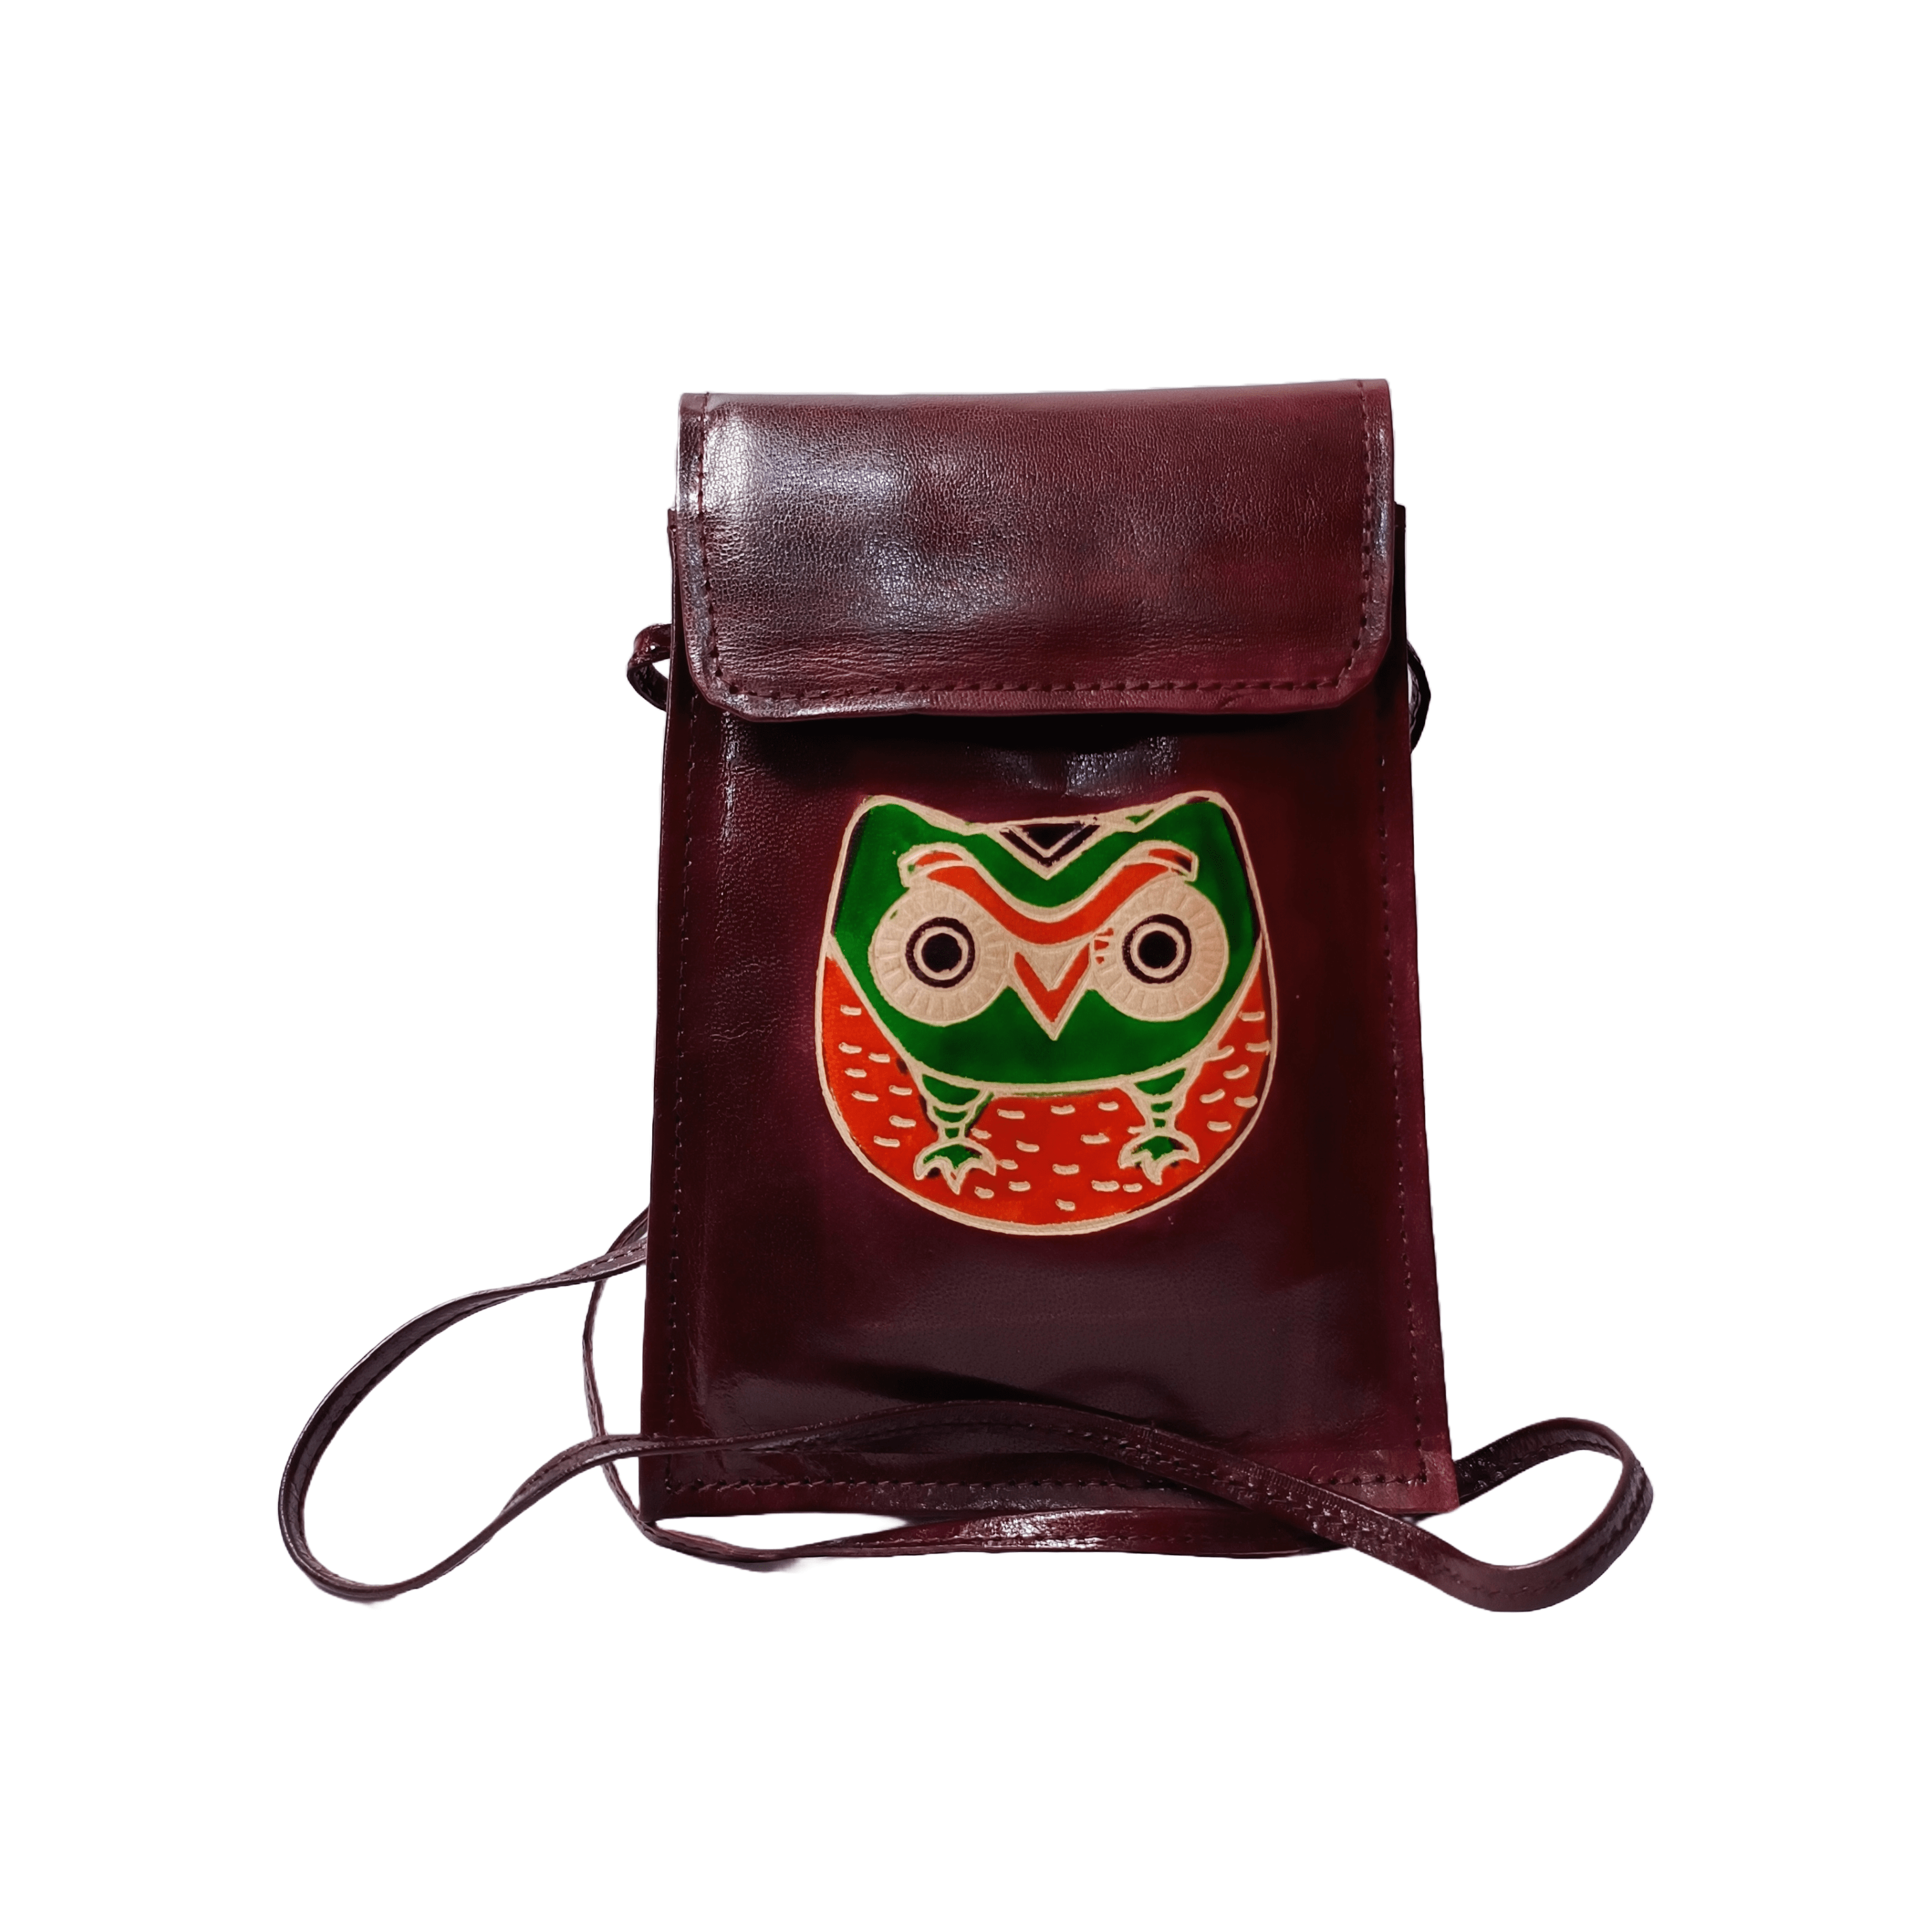 Mobile Holder with Owl Print Brown